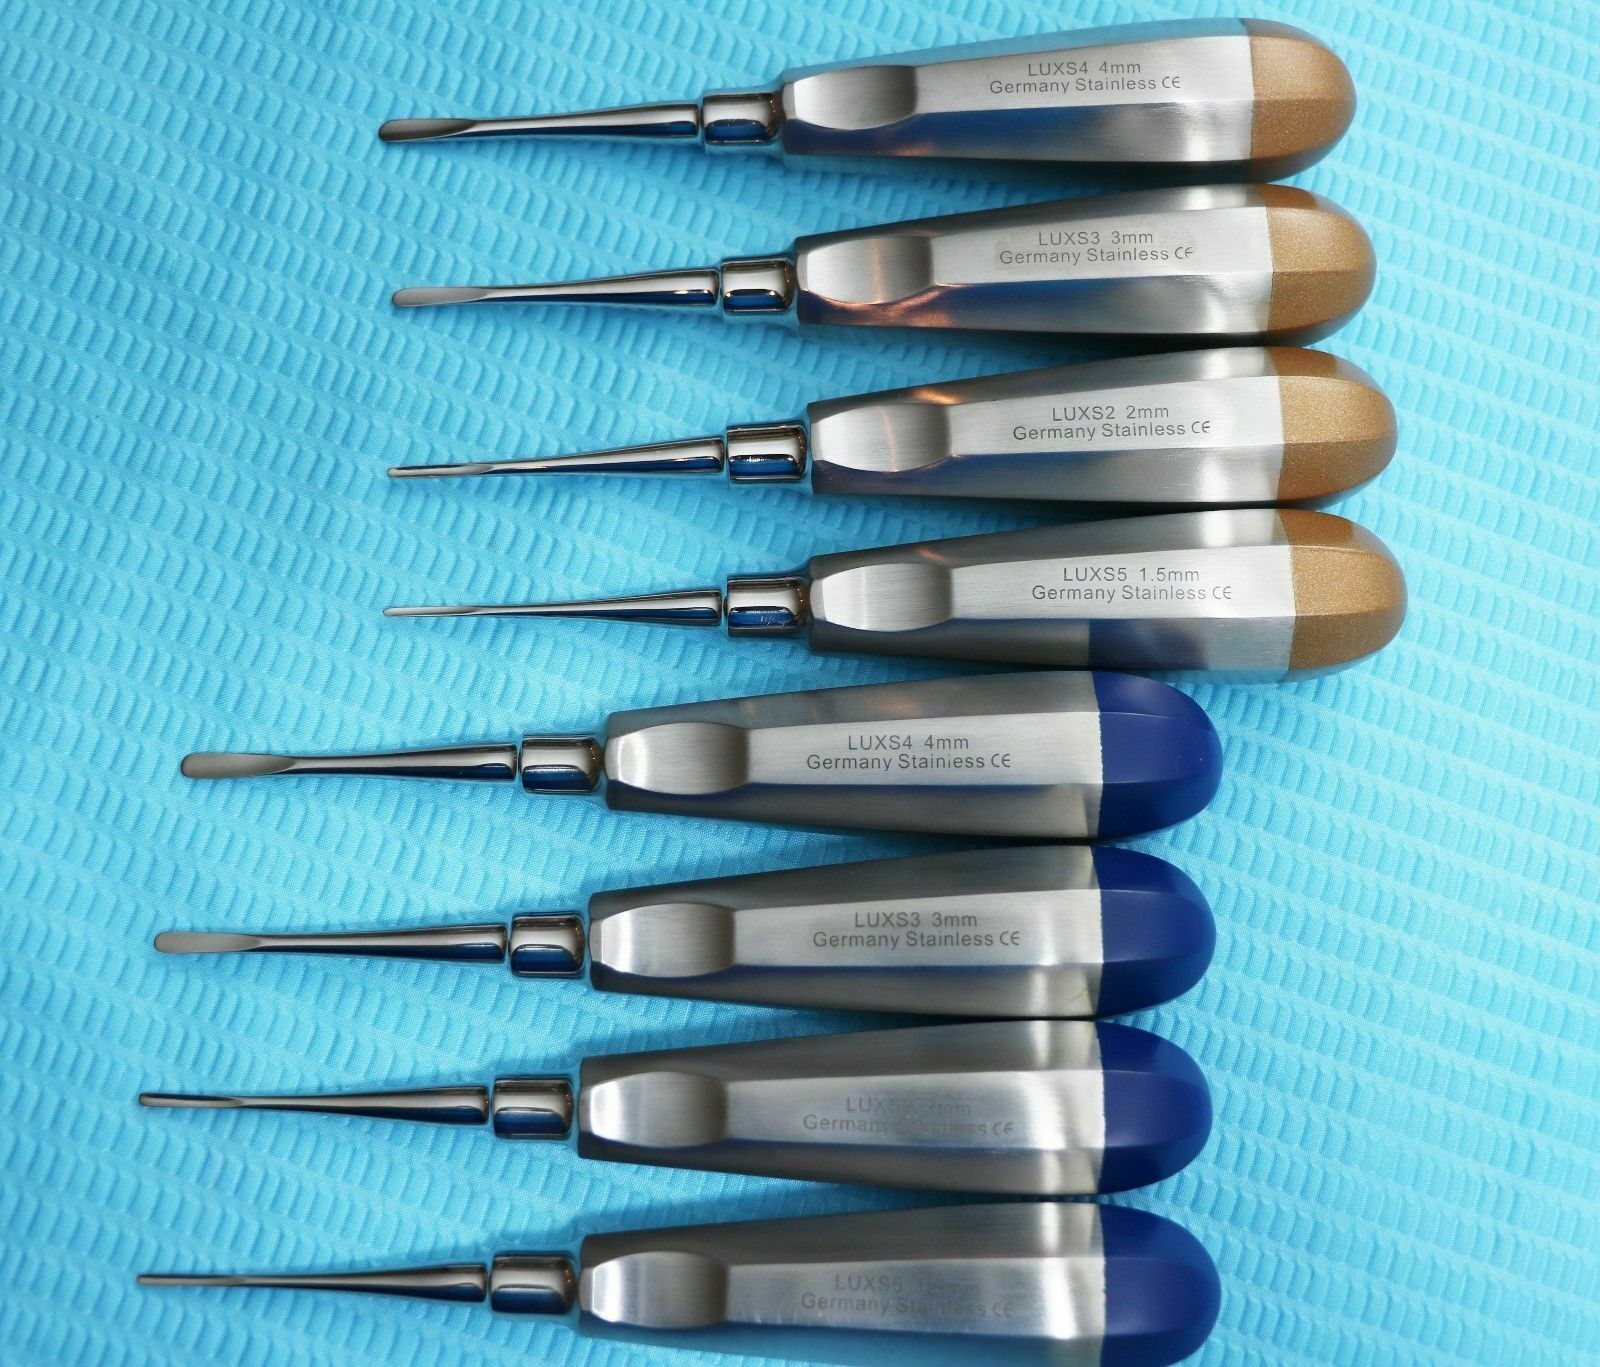 GERMAN-8-PC-STRAIGHT-DENTAL-SURGERY-EXTRACTING-LUXATING-APICAL-ROOT-TIP-ELEVATOR-1.jpg